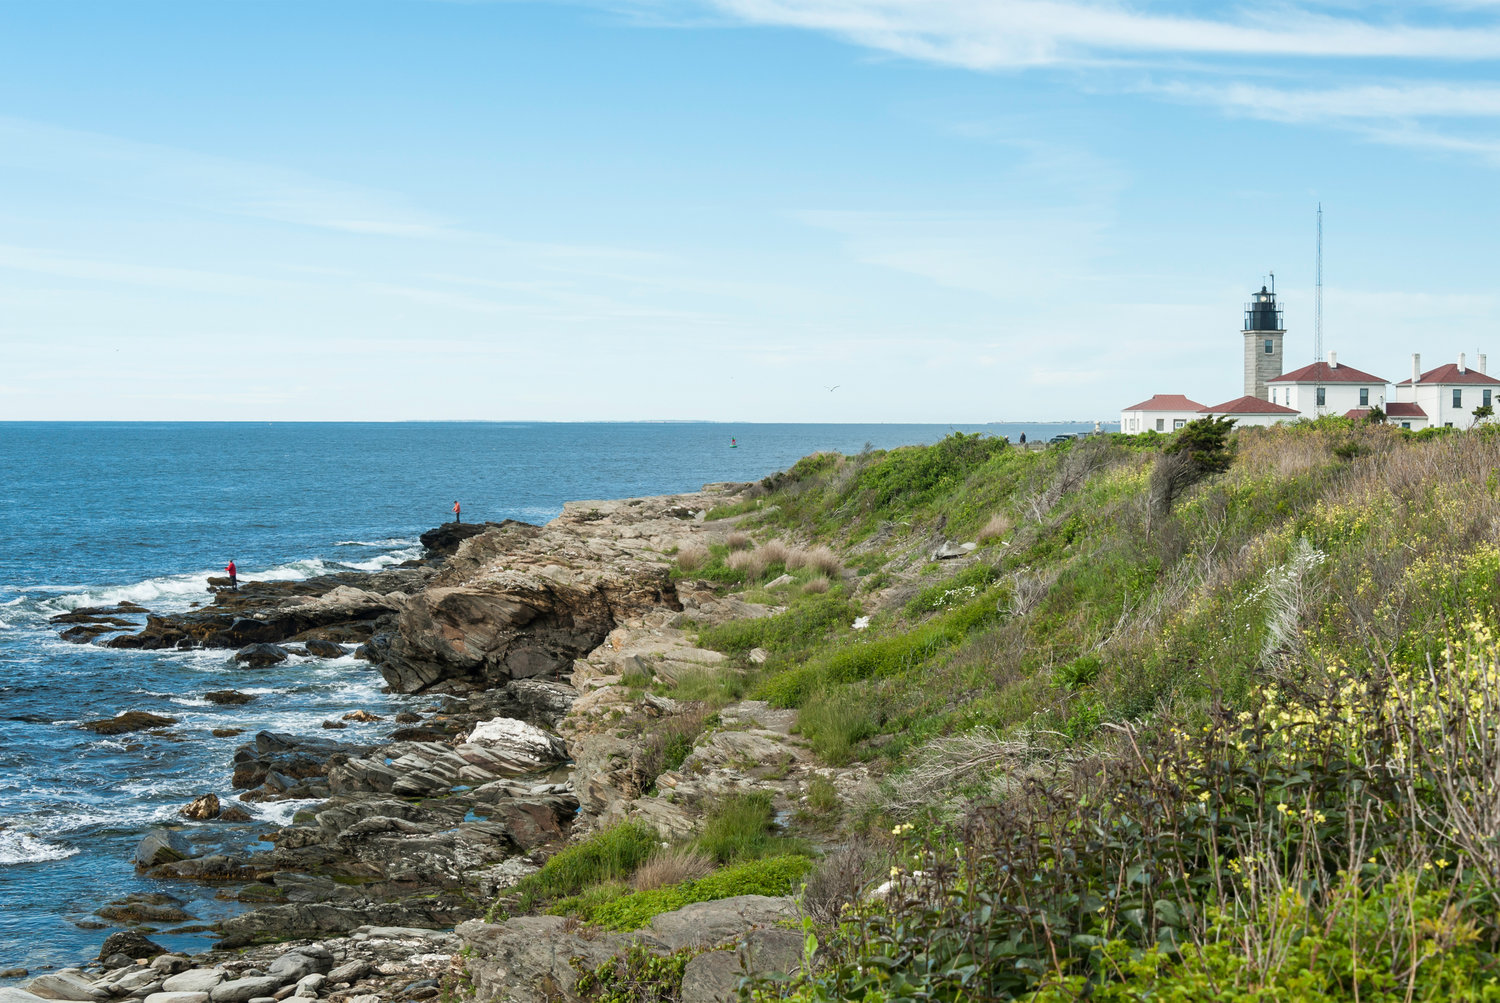 Prepare to whip out your phone or camera to capture the beauty of Beavertail State Park